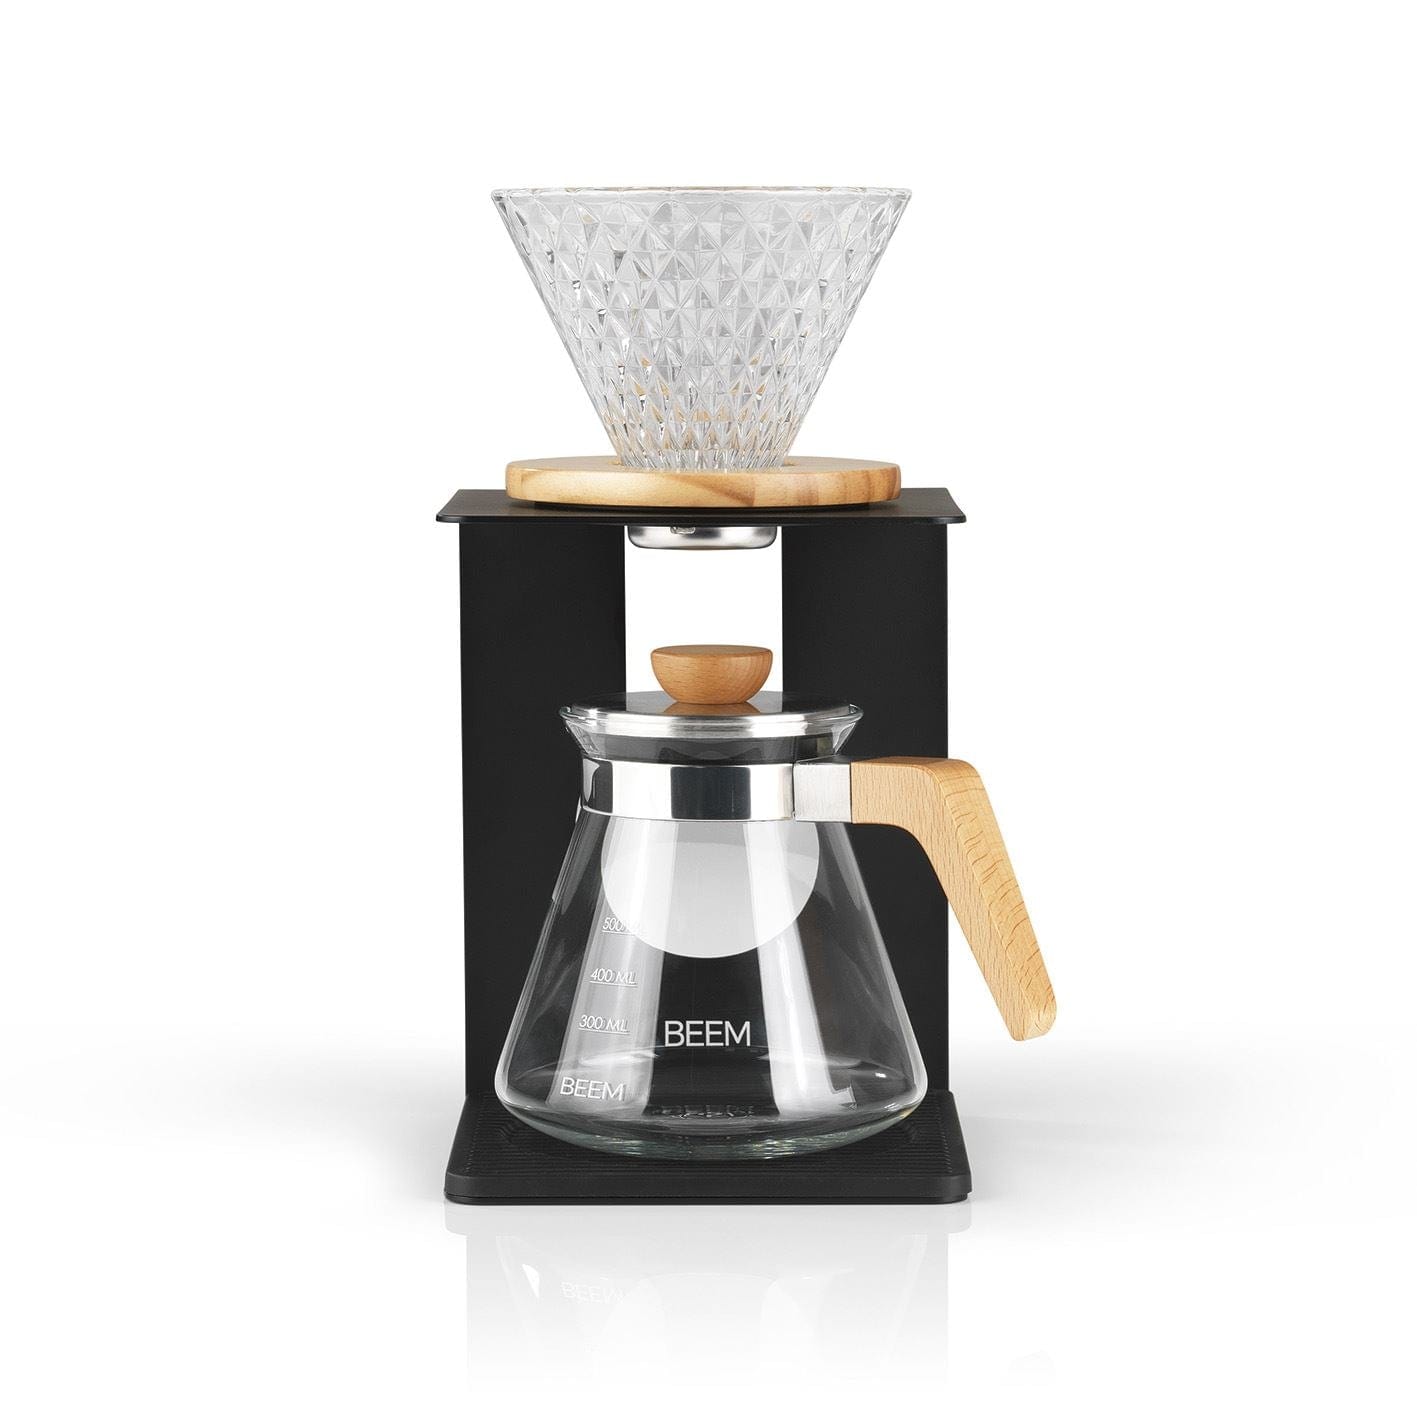 POUR OVER Filter Coffee Maker Set (4 cups) - Wood